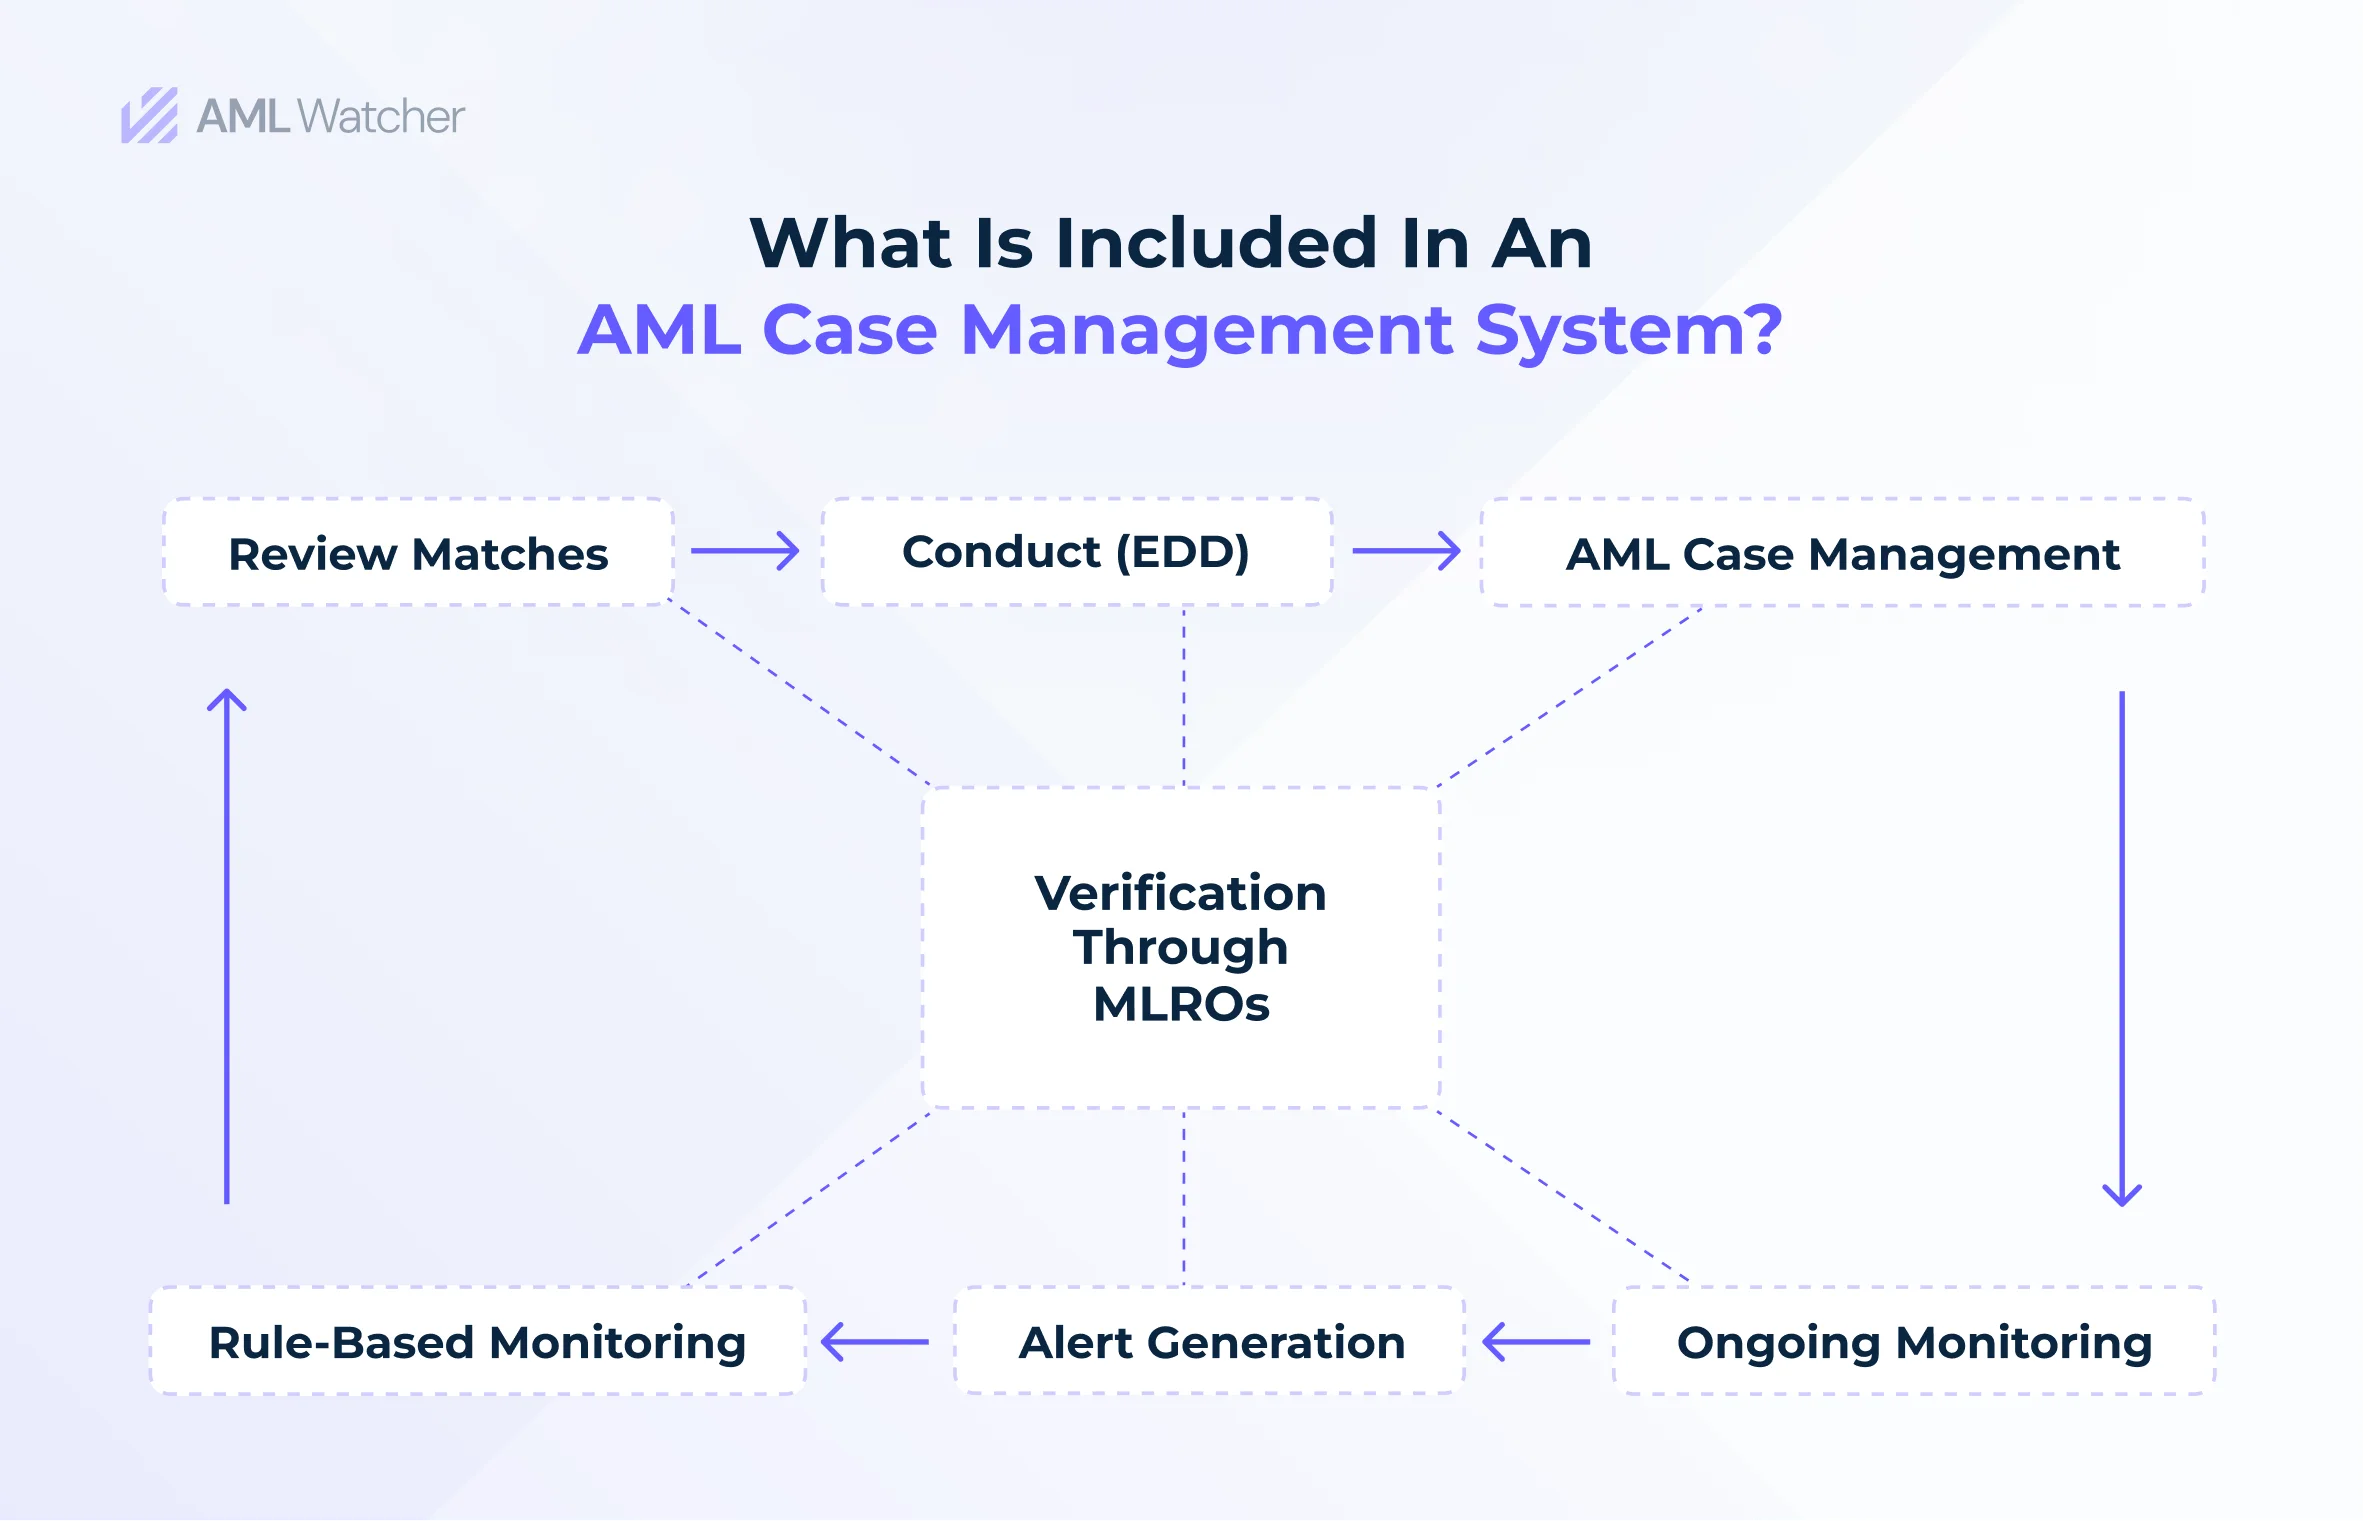 What is Included in an AML Case Management System?